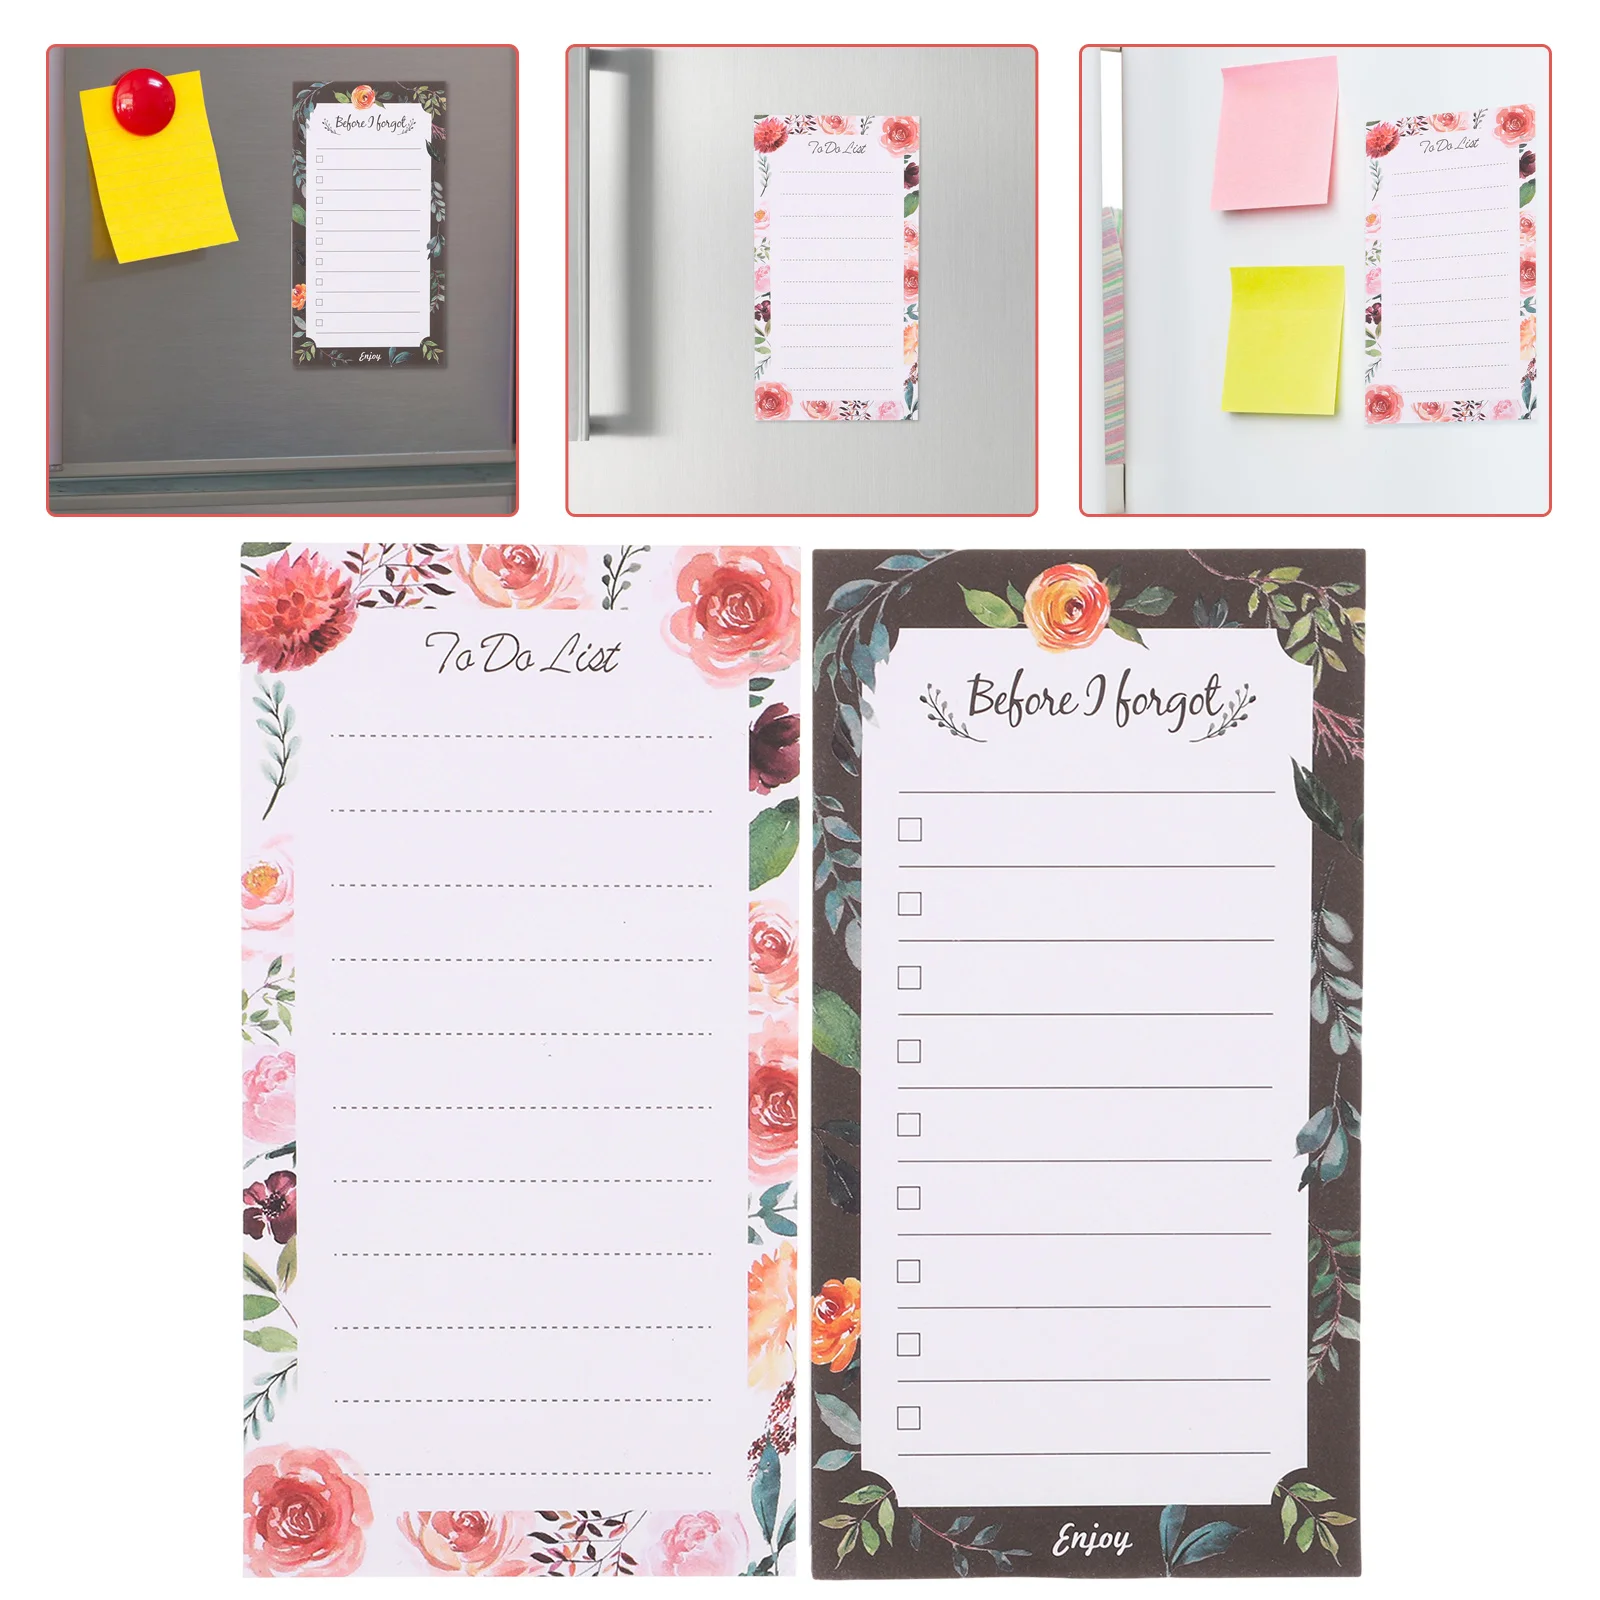 2 Pcs Fridge Magnetic Notepad Pads Grocery List Sticky Shopping Notepads to Do with 6pcs magnetic notepads grocery list shopping list notepads with magnet fridge memo notepads